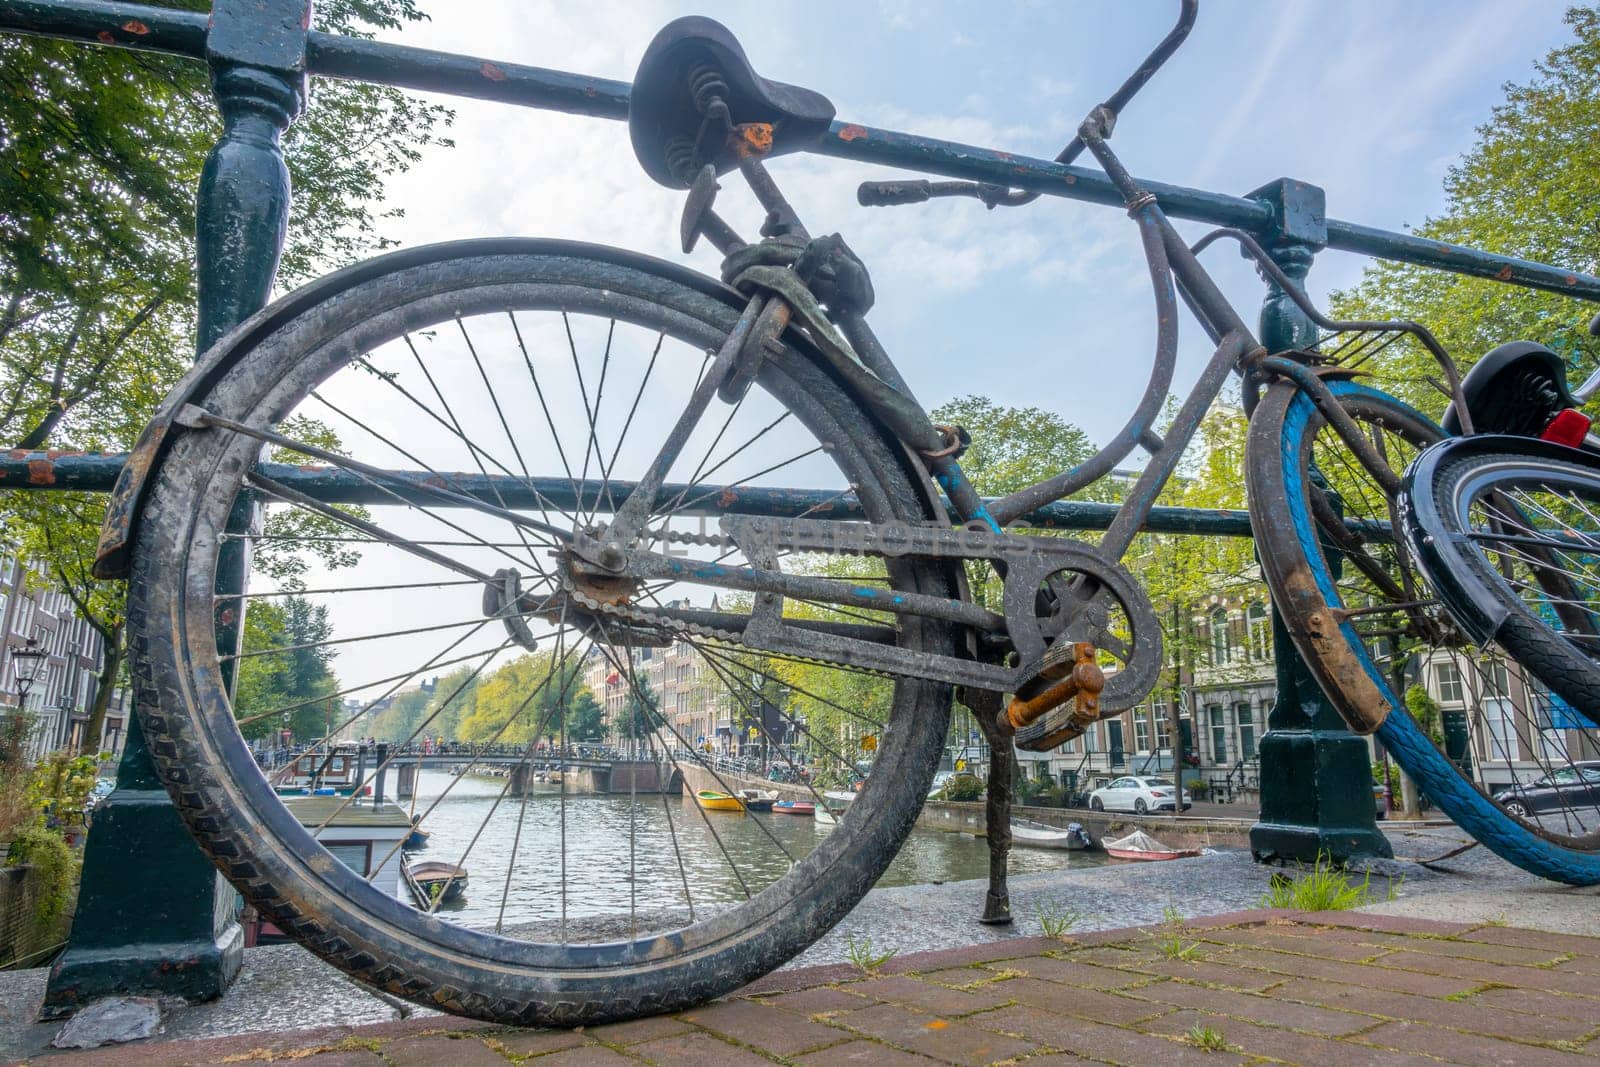 Netherlands. Summer day in Amsterdam. Dirty old bicycle near the canal fence